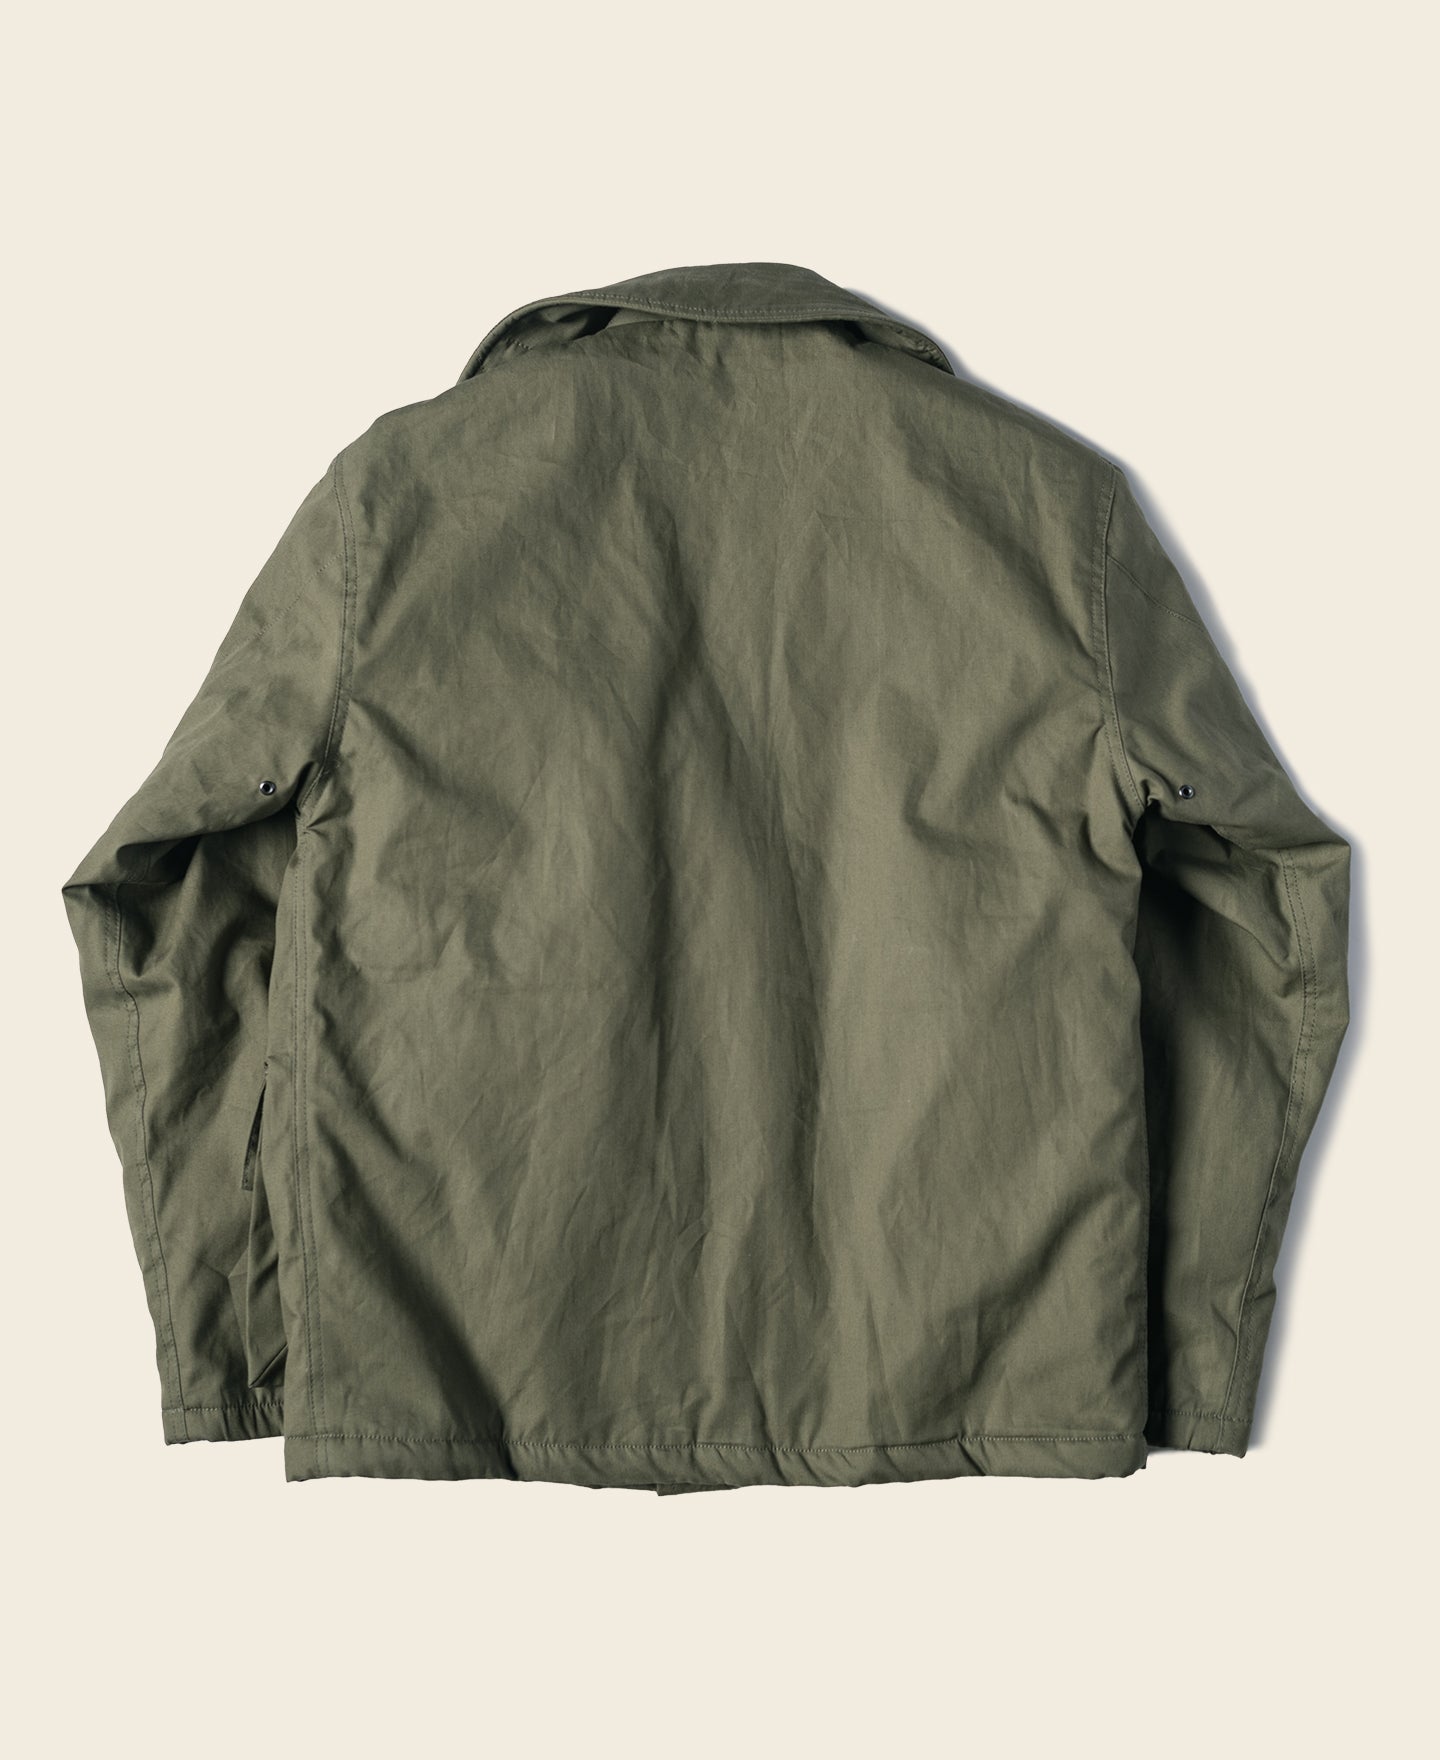 Men's Jackets & Coats | Vintage Military & Work Style for